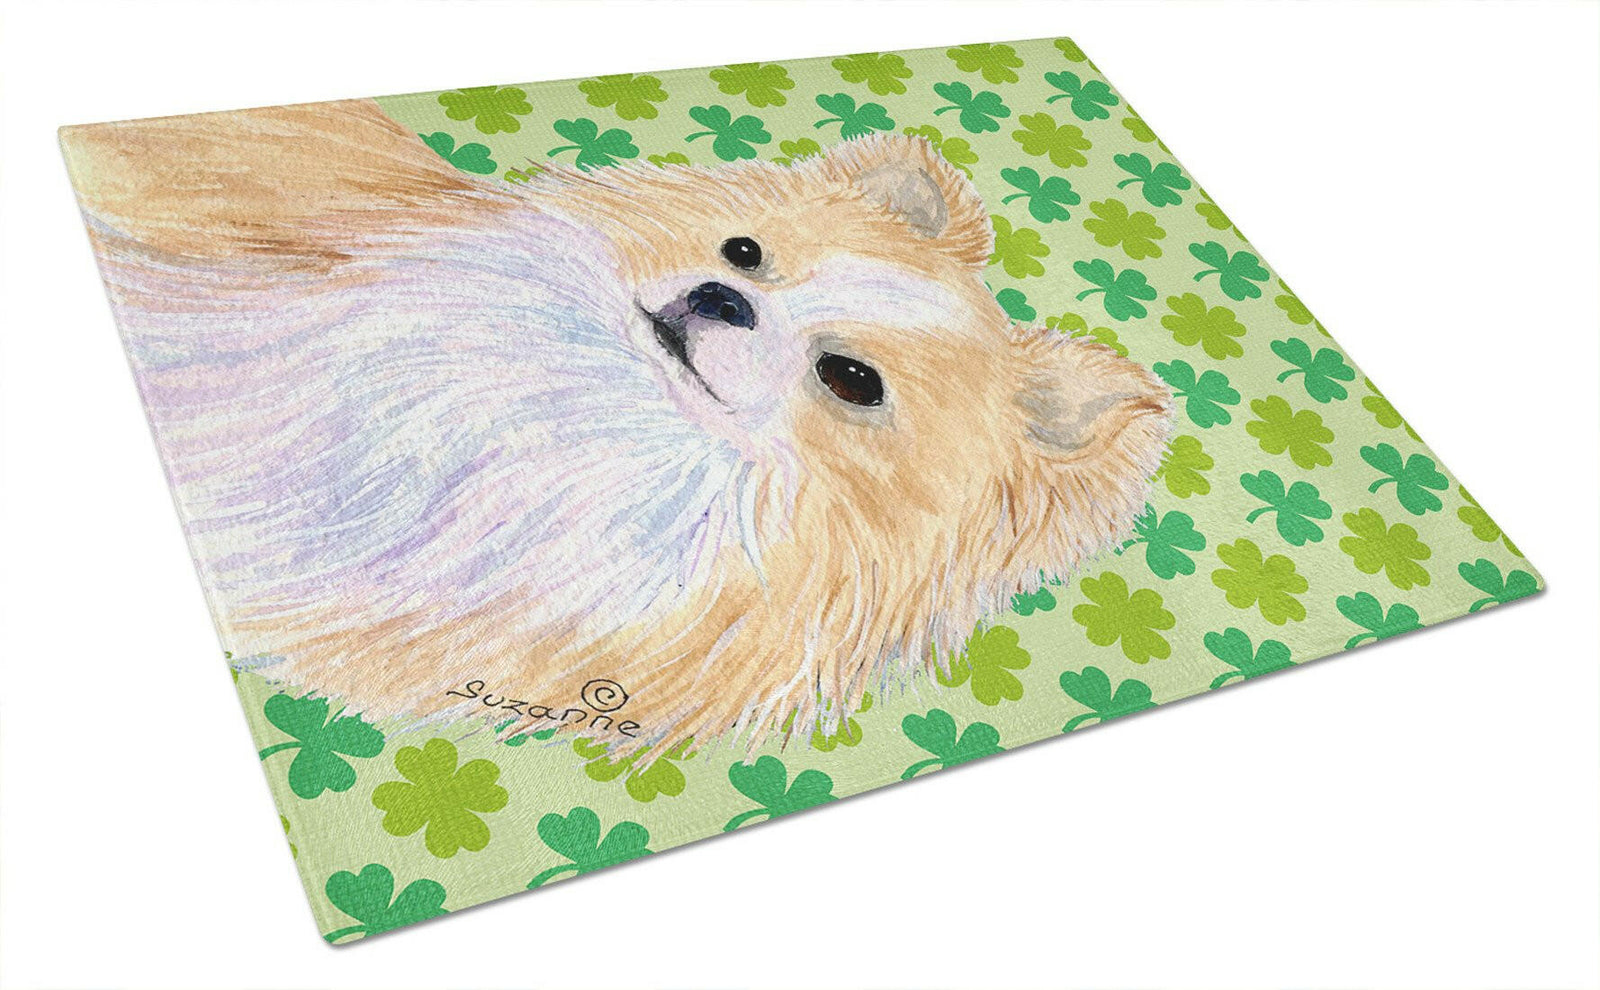 Chihuahua St. Patrick's Day Shamrock Portrait Glass Cutting Board Large by Caroline's Treasures